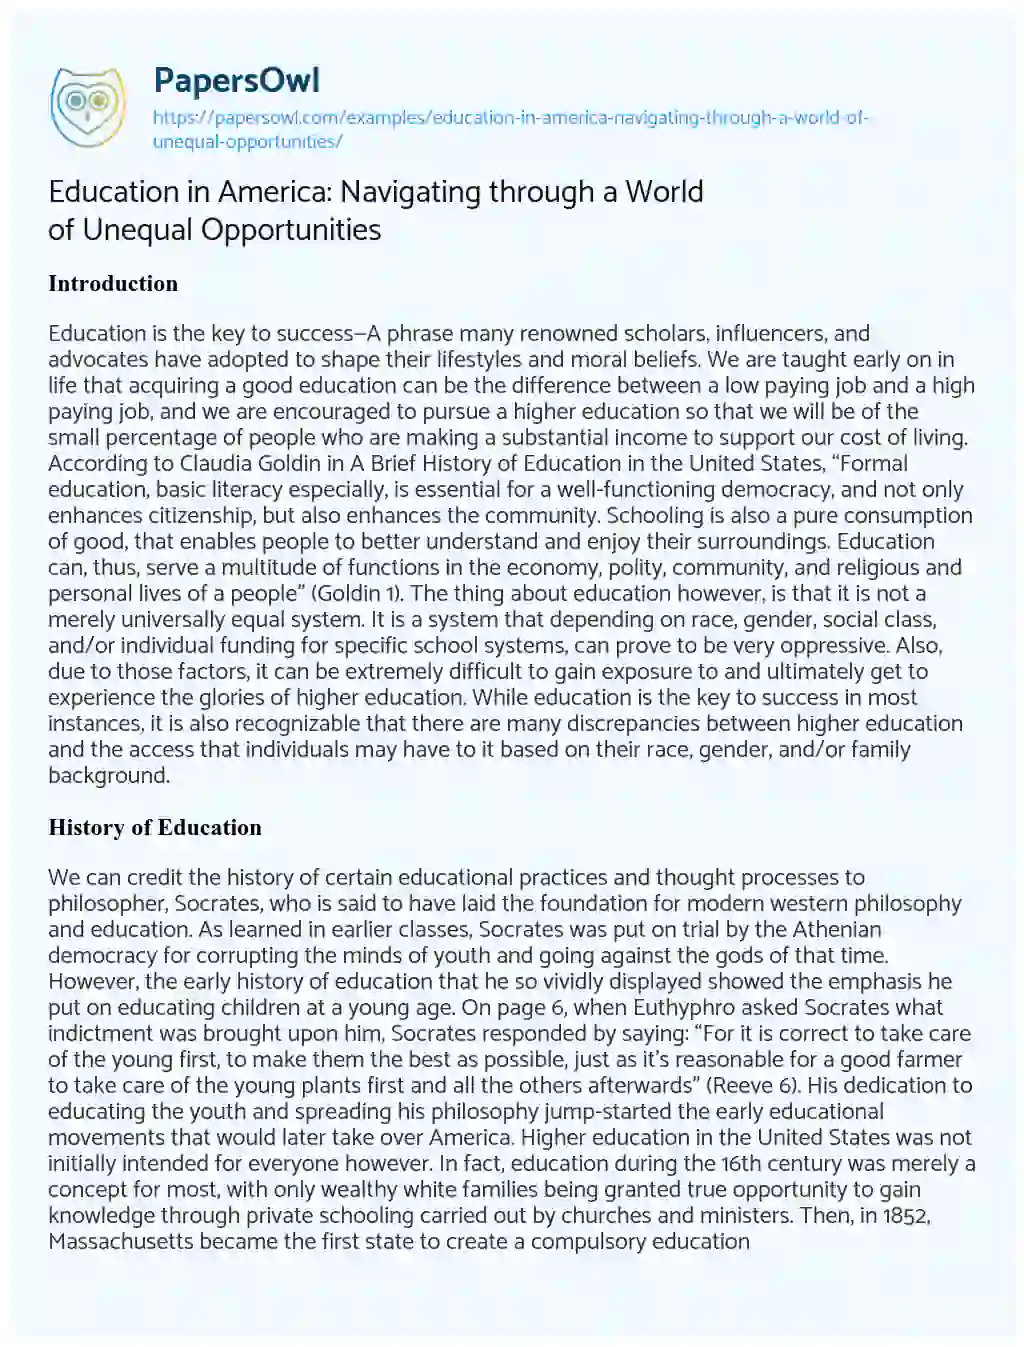 Essay on Education in America: Navigating through a World of Unequal Opportunities